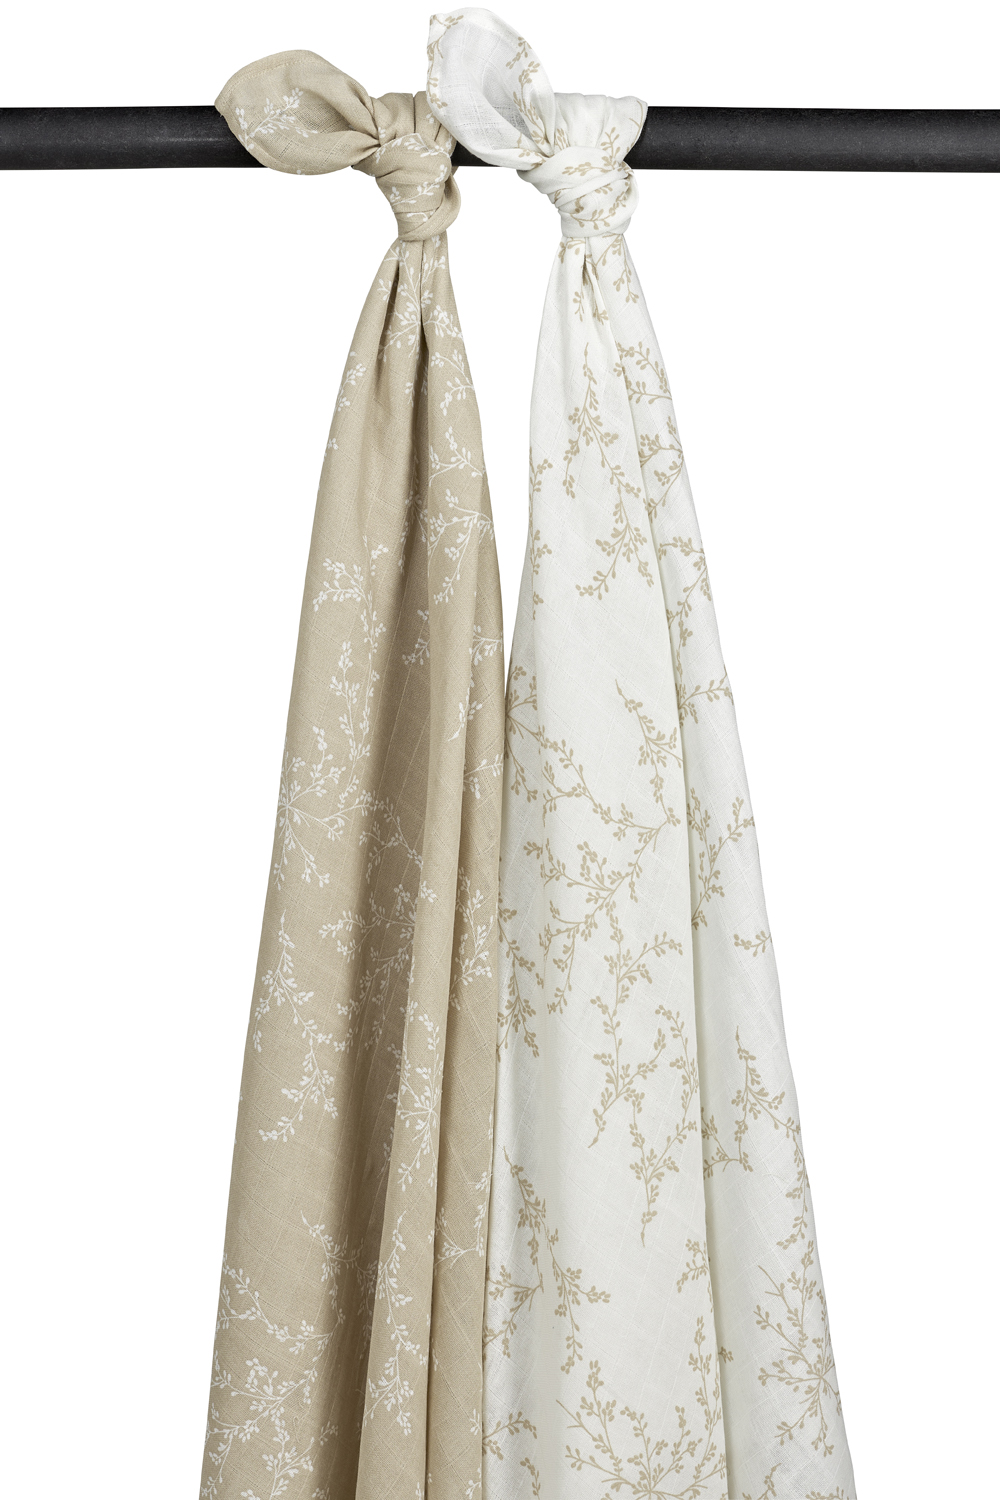 Swaddle 2-pack hydrofiel Branches - sand - 120x120cm